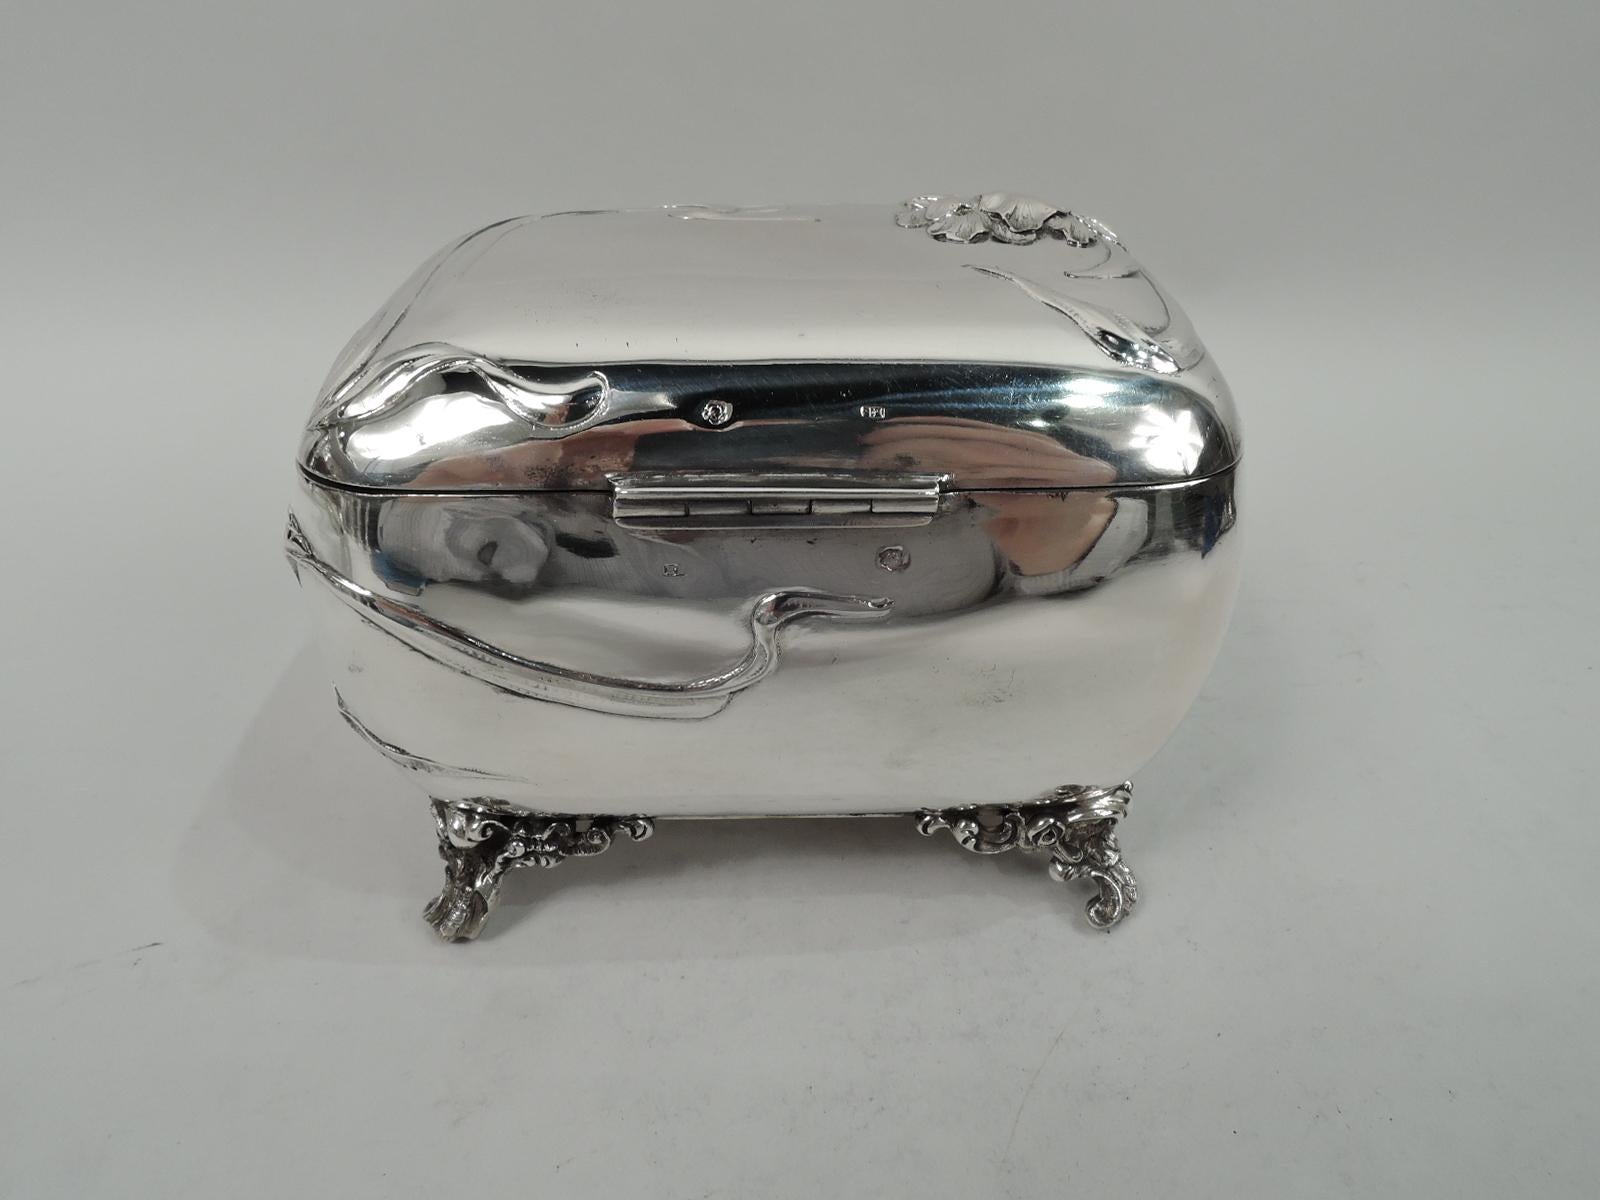 Fresh and pretty turn-of-the-century Austrian Art Nouveau 800 silver casket. Rectangular with curved sides. Cover hinged and raised with scroll tab. Chased and engraved wrapround ornament with entwined and whiplash tendrils and flower heads. Rococo